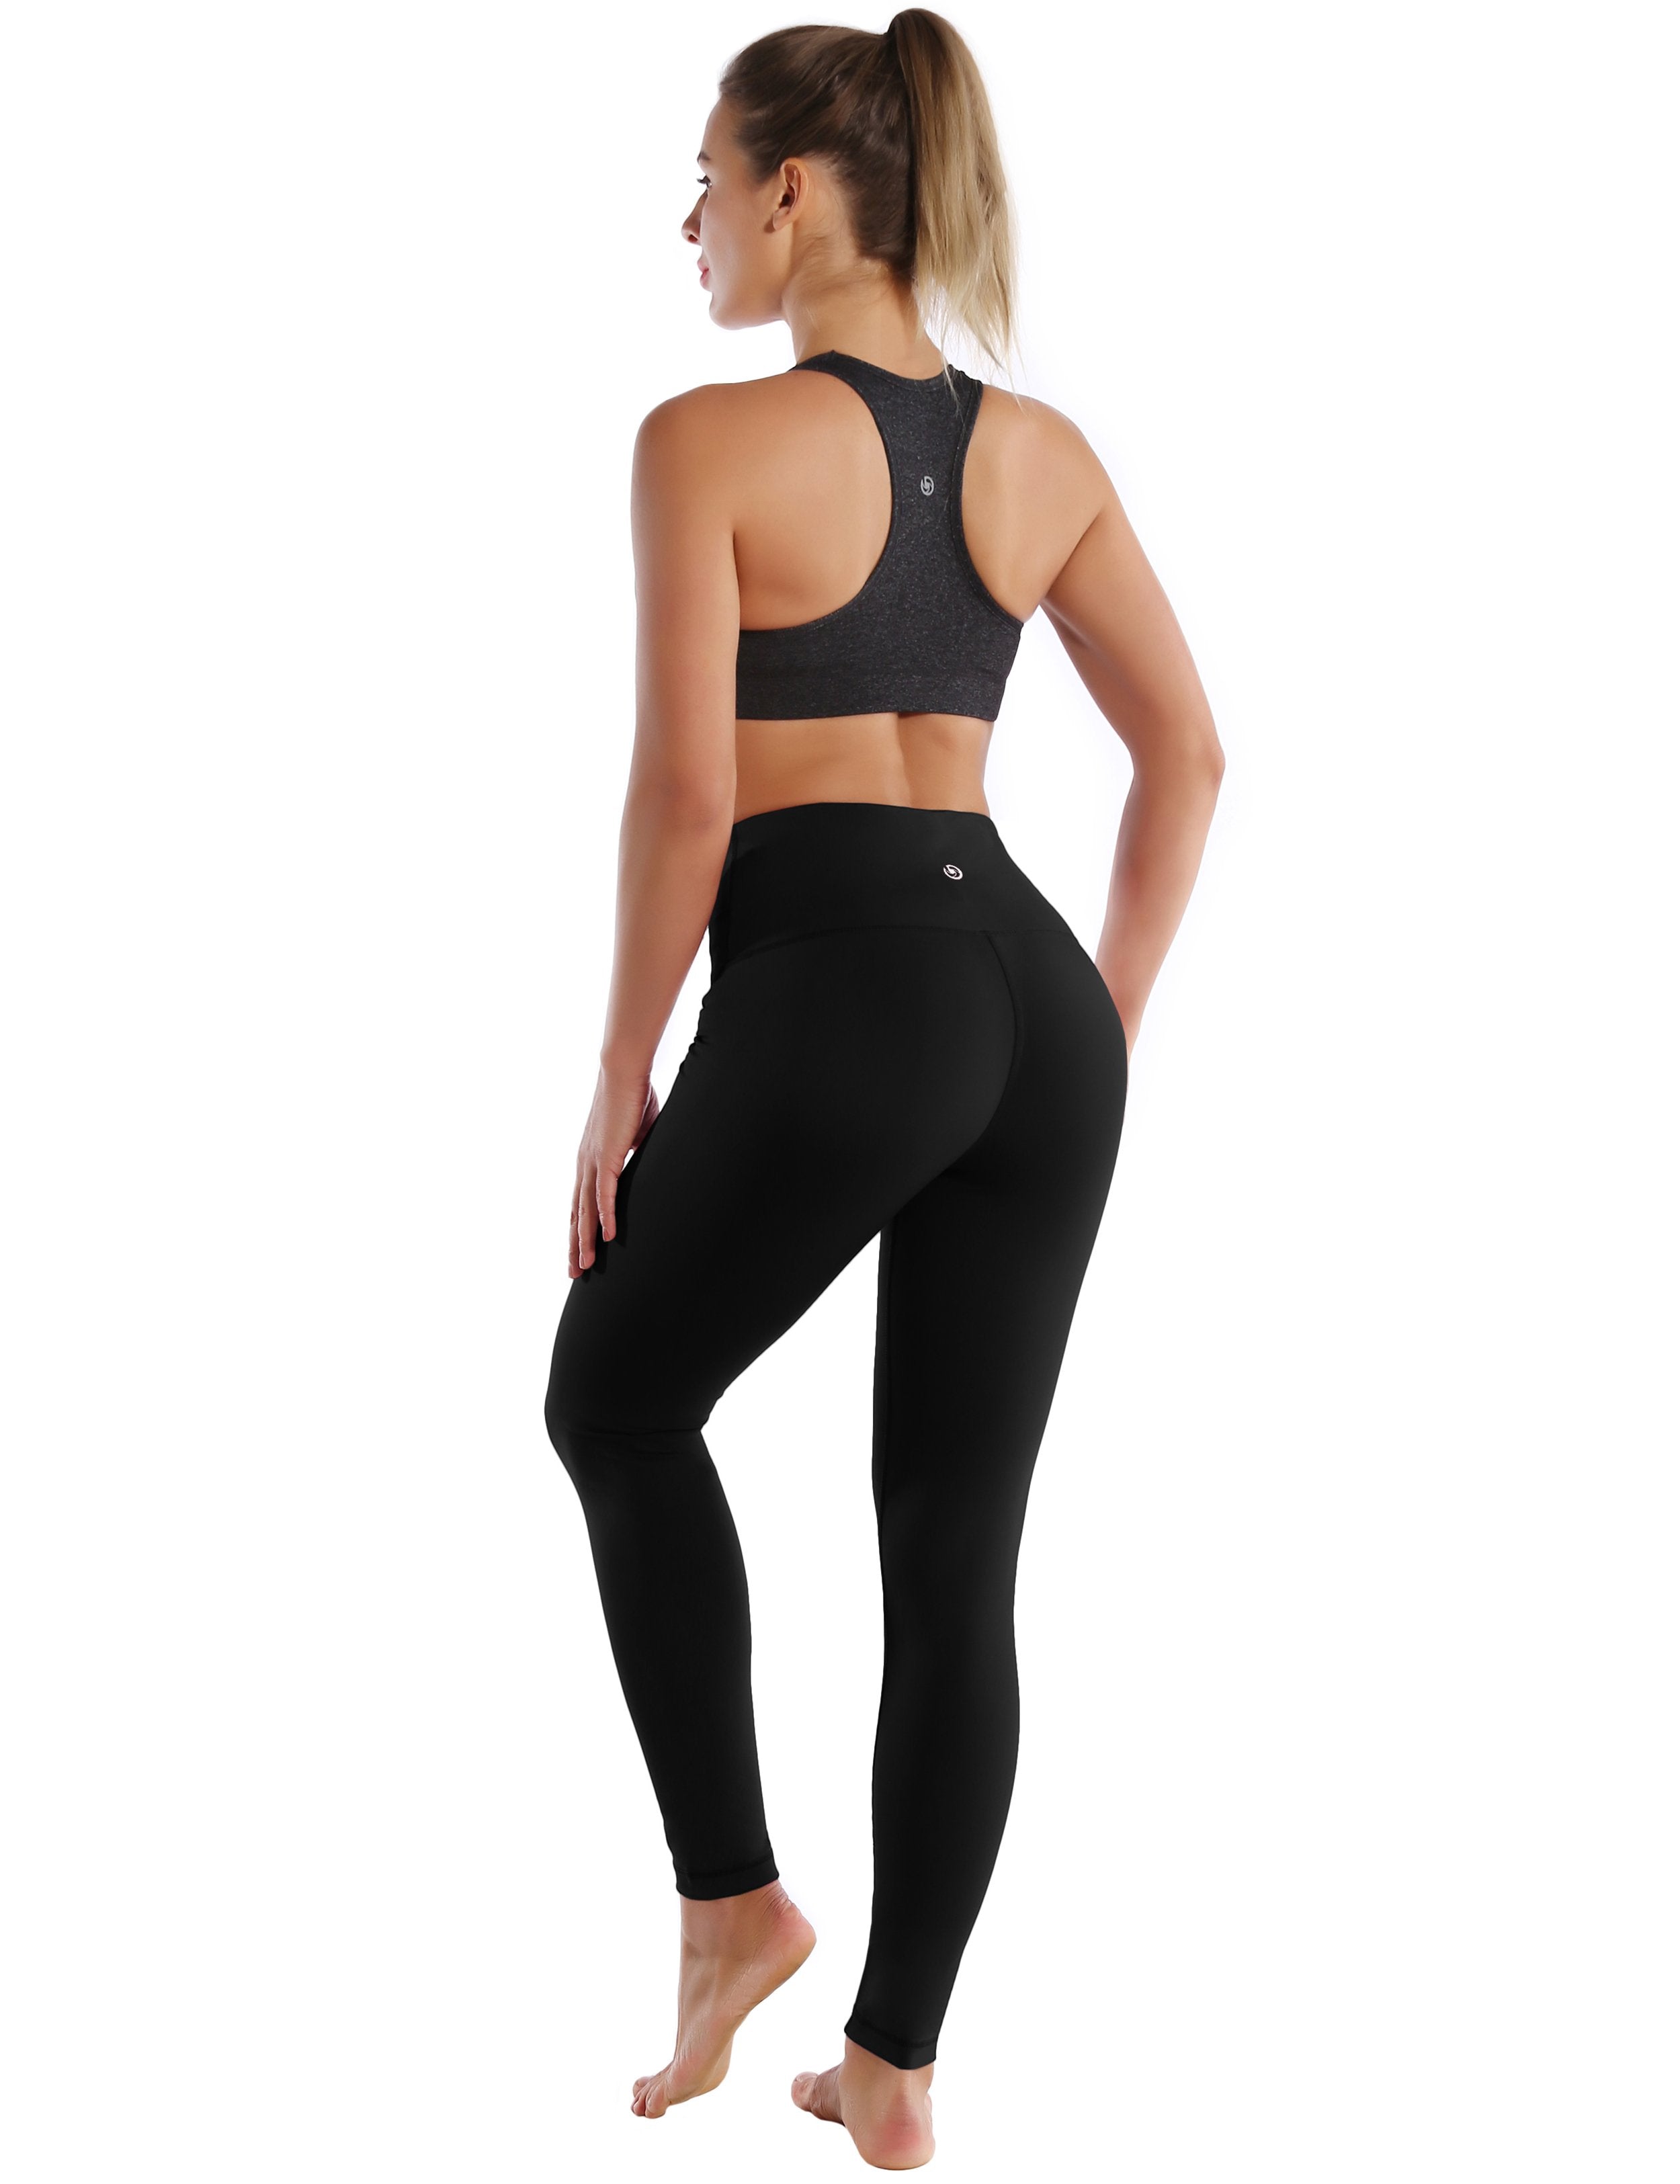 Bubblelime 222628 Inseam Yoga Pants with Inner Pocket, High Waist Capris  for Workout, Running, Tummy Control